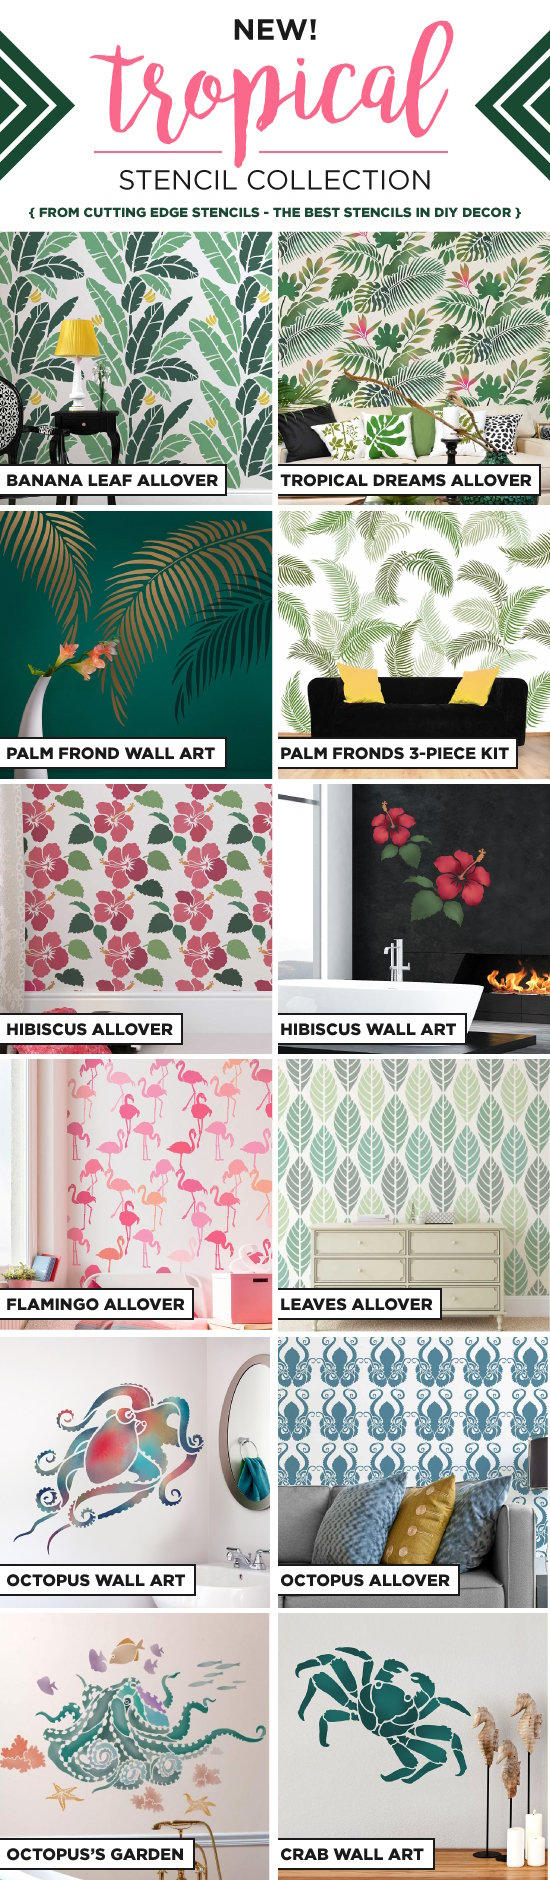 Cutting Edge Stencils is excited to introduce NEW tropical stencil patterns for walls, furniture, and DIY home decorating projects.  http://www.cuttingedgestencils.com/wall-stencils-stencil-designs.html